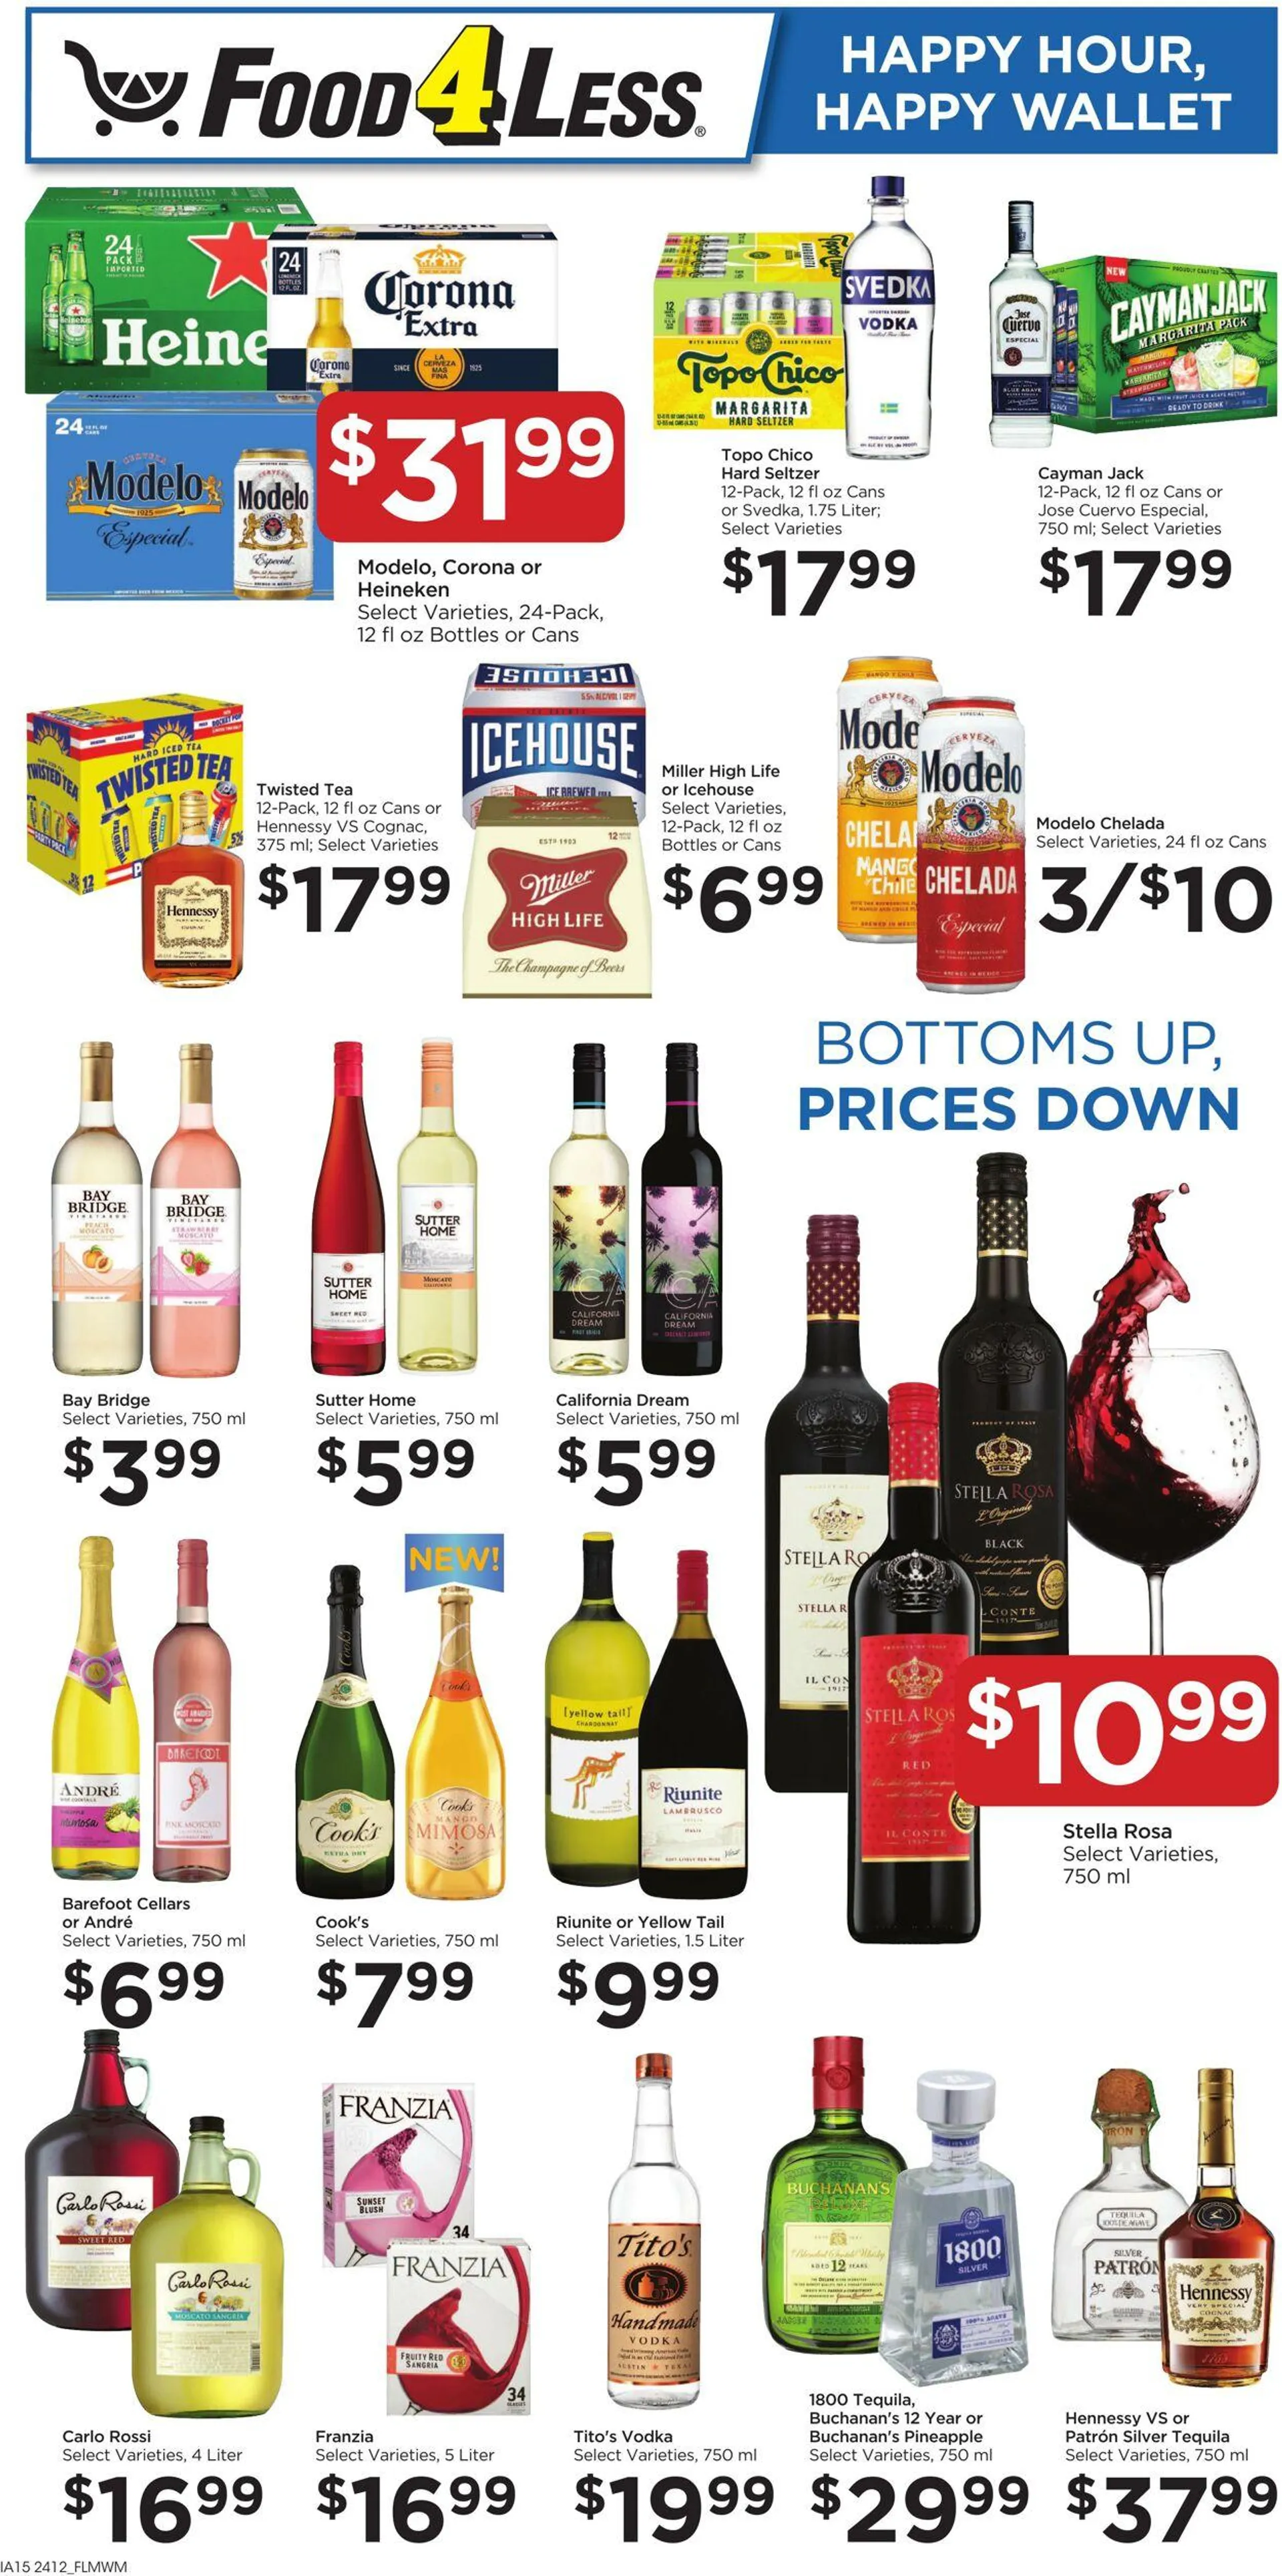 Food 4 Less Current weekly ad - 1